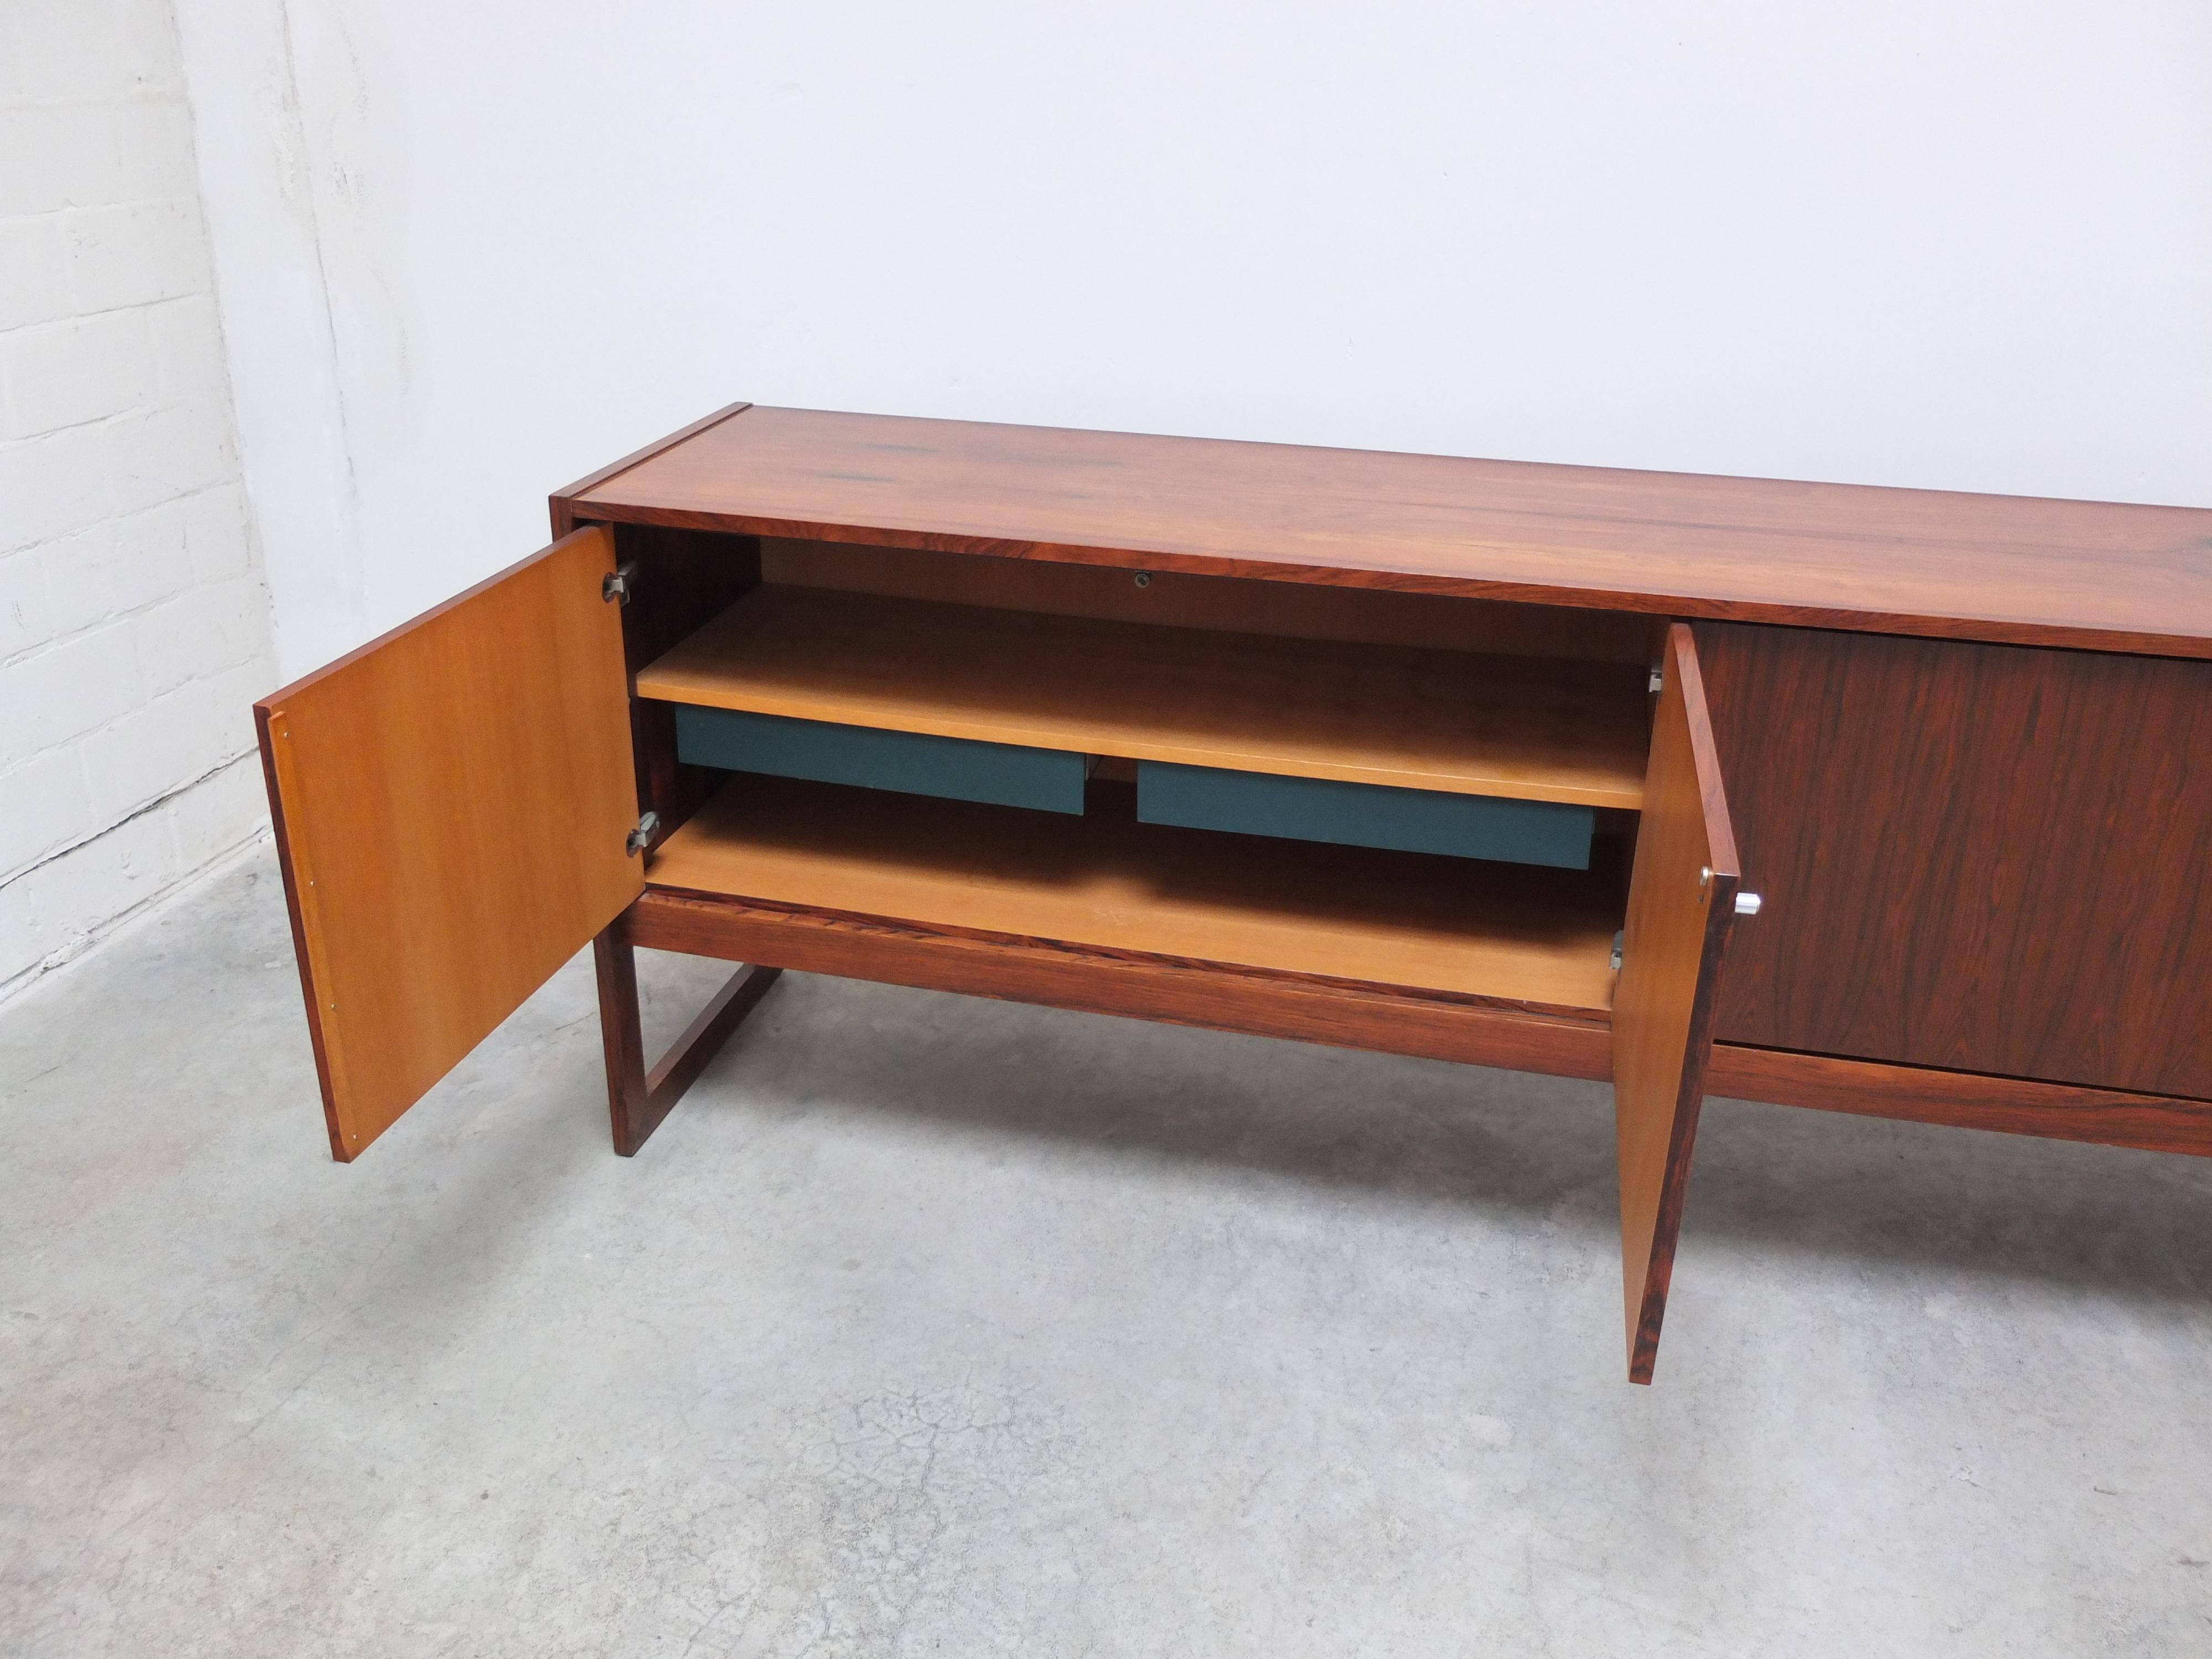 Large Exclusive 'Tecton' Sideboard by V-Form, 1960s For Sale 9